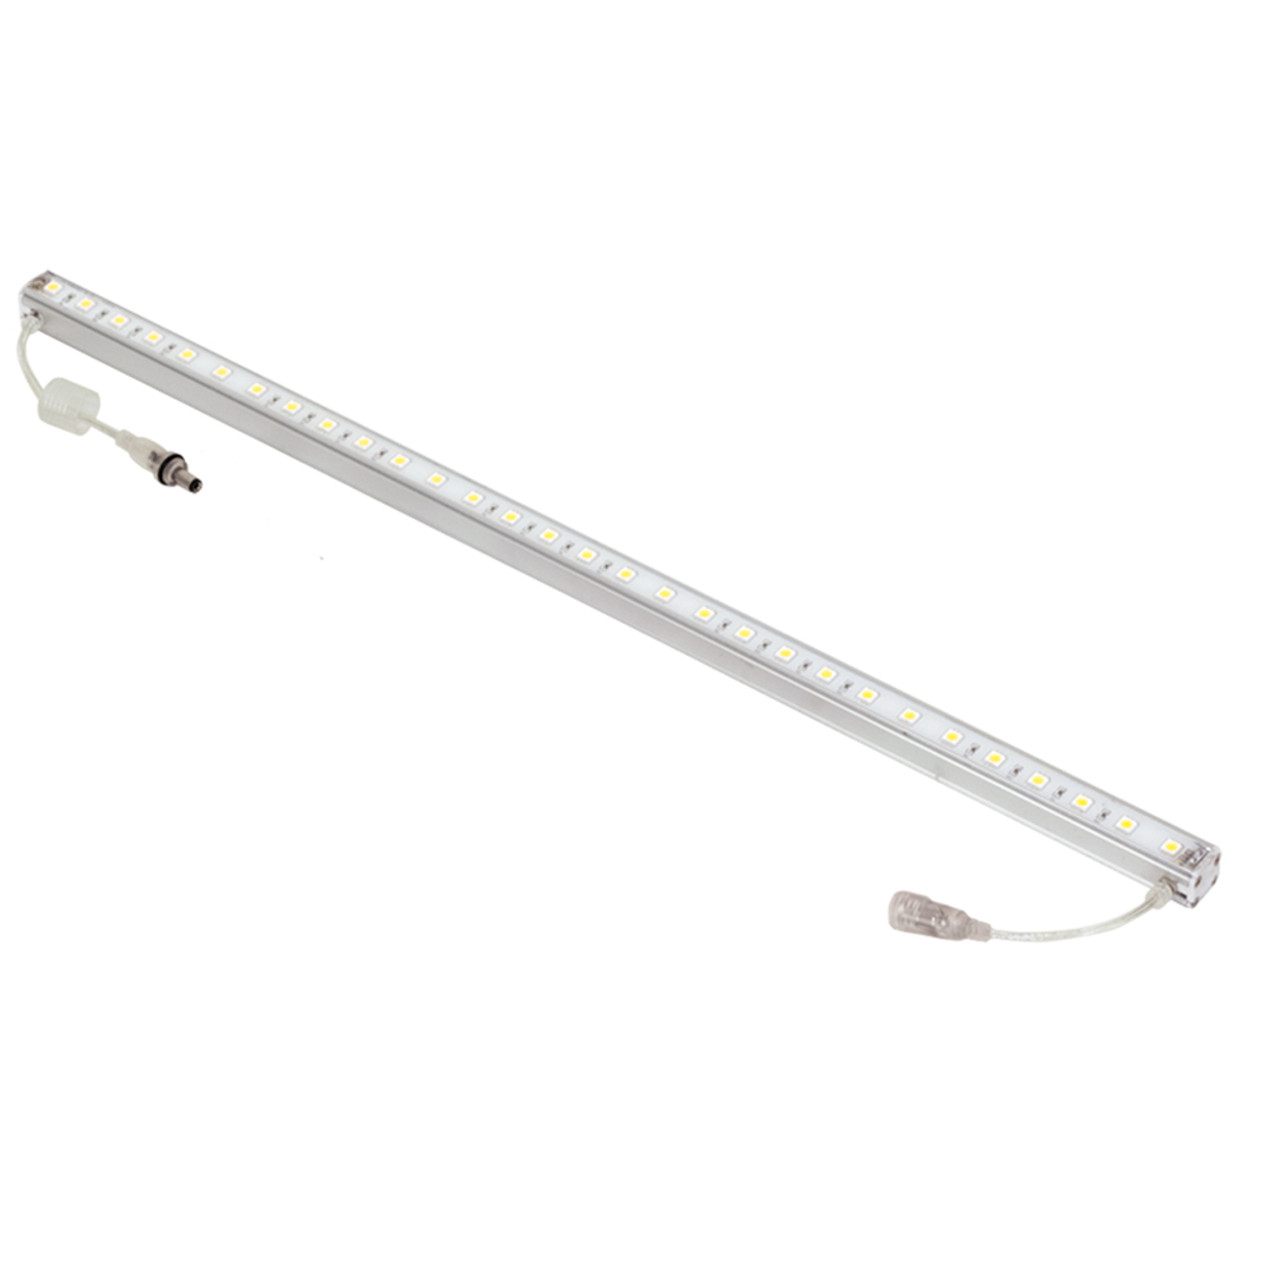 JESCO Lighting DL-RS-48-RGB 15.2W Dimmable linear LED fixture for wet,damp and dry locations. Aluminium extruded housing. , RGB